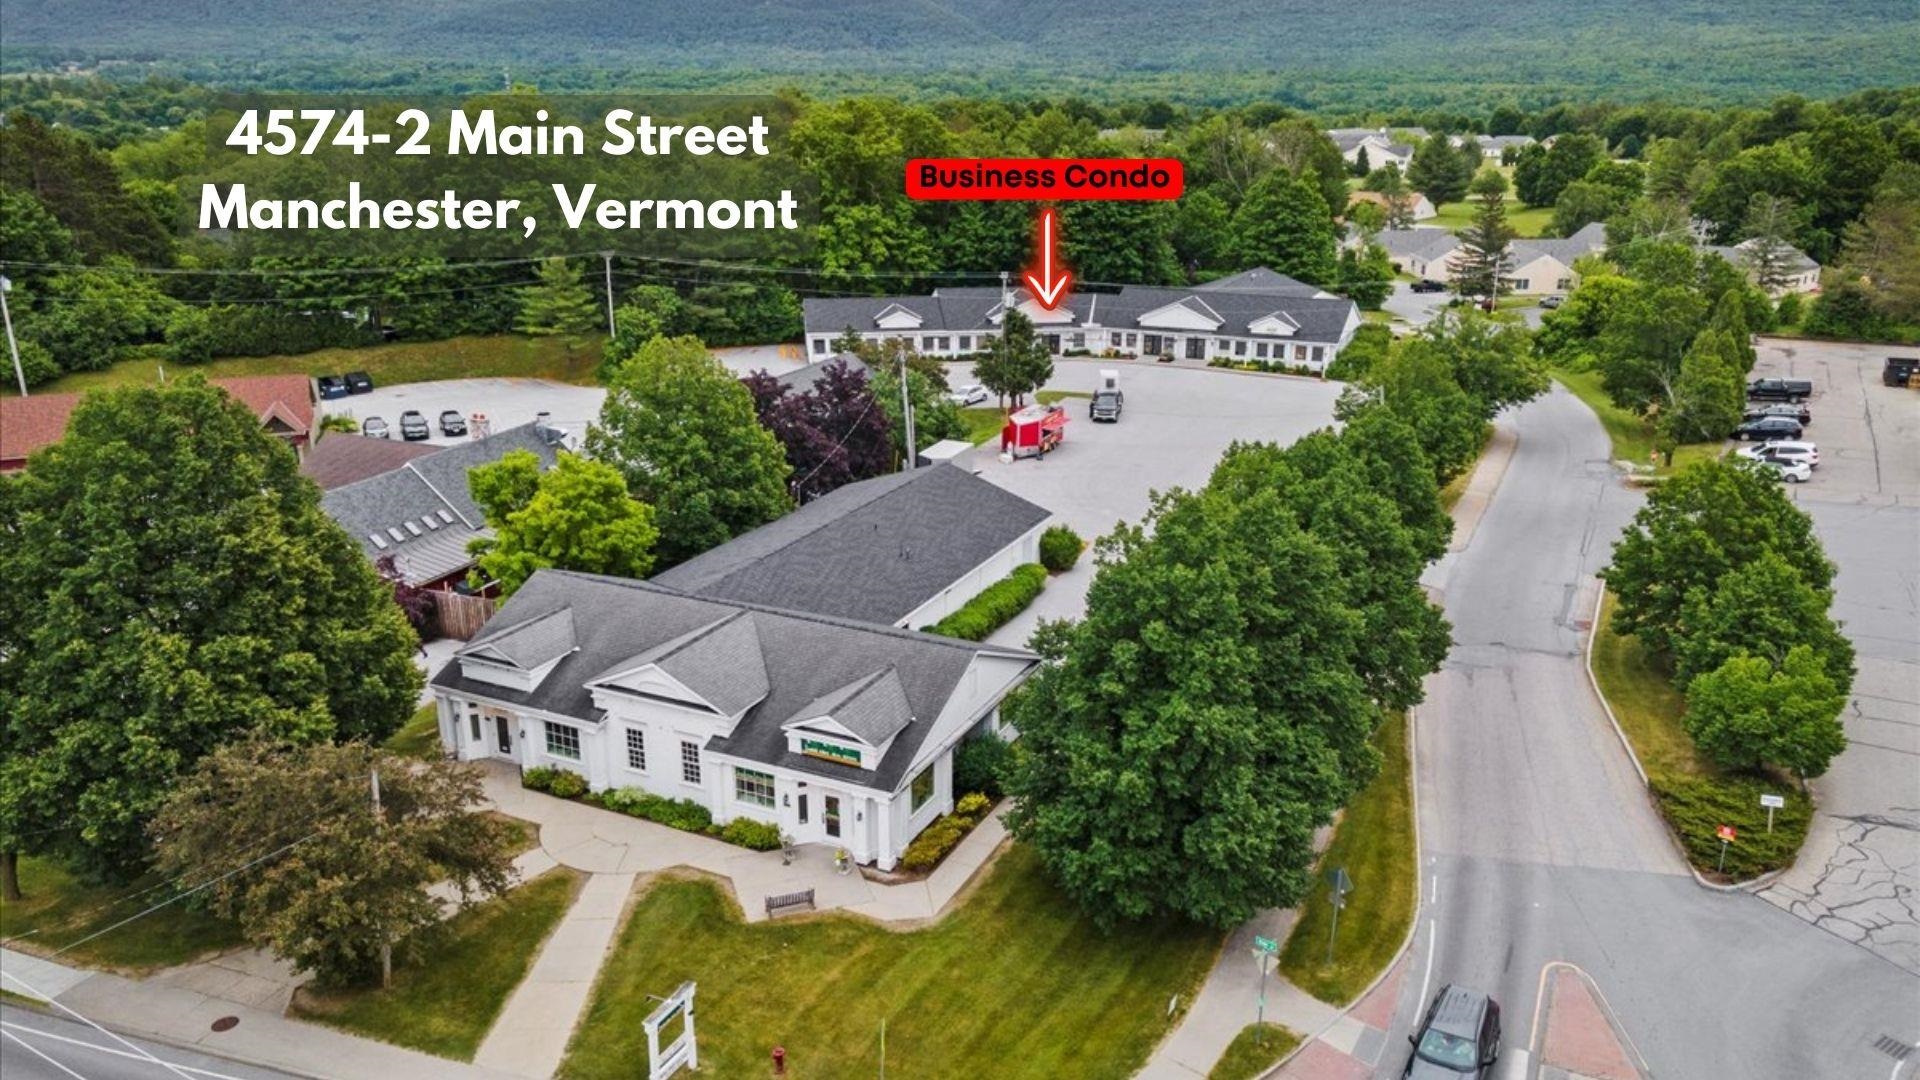 Manchester VT Commercial Property for sale $589,000 